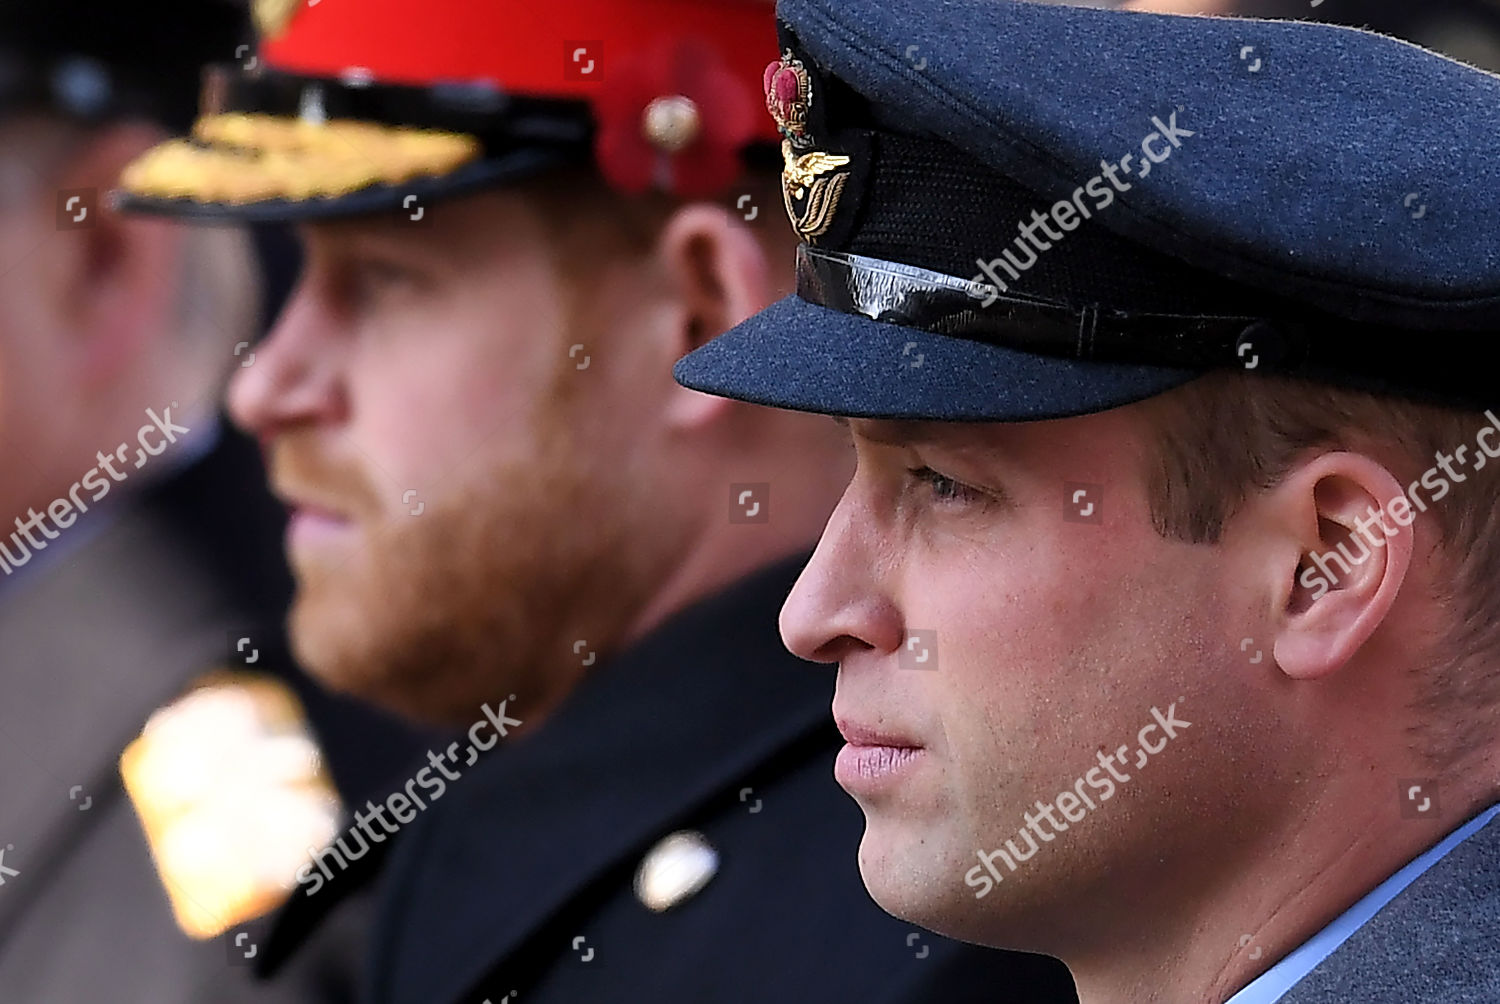 remembrance-day-service-the-cenotaph-whitehall-london-uk-shutterstock-editorial-10469662cy.jpg